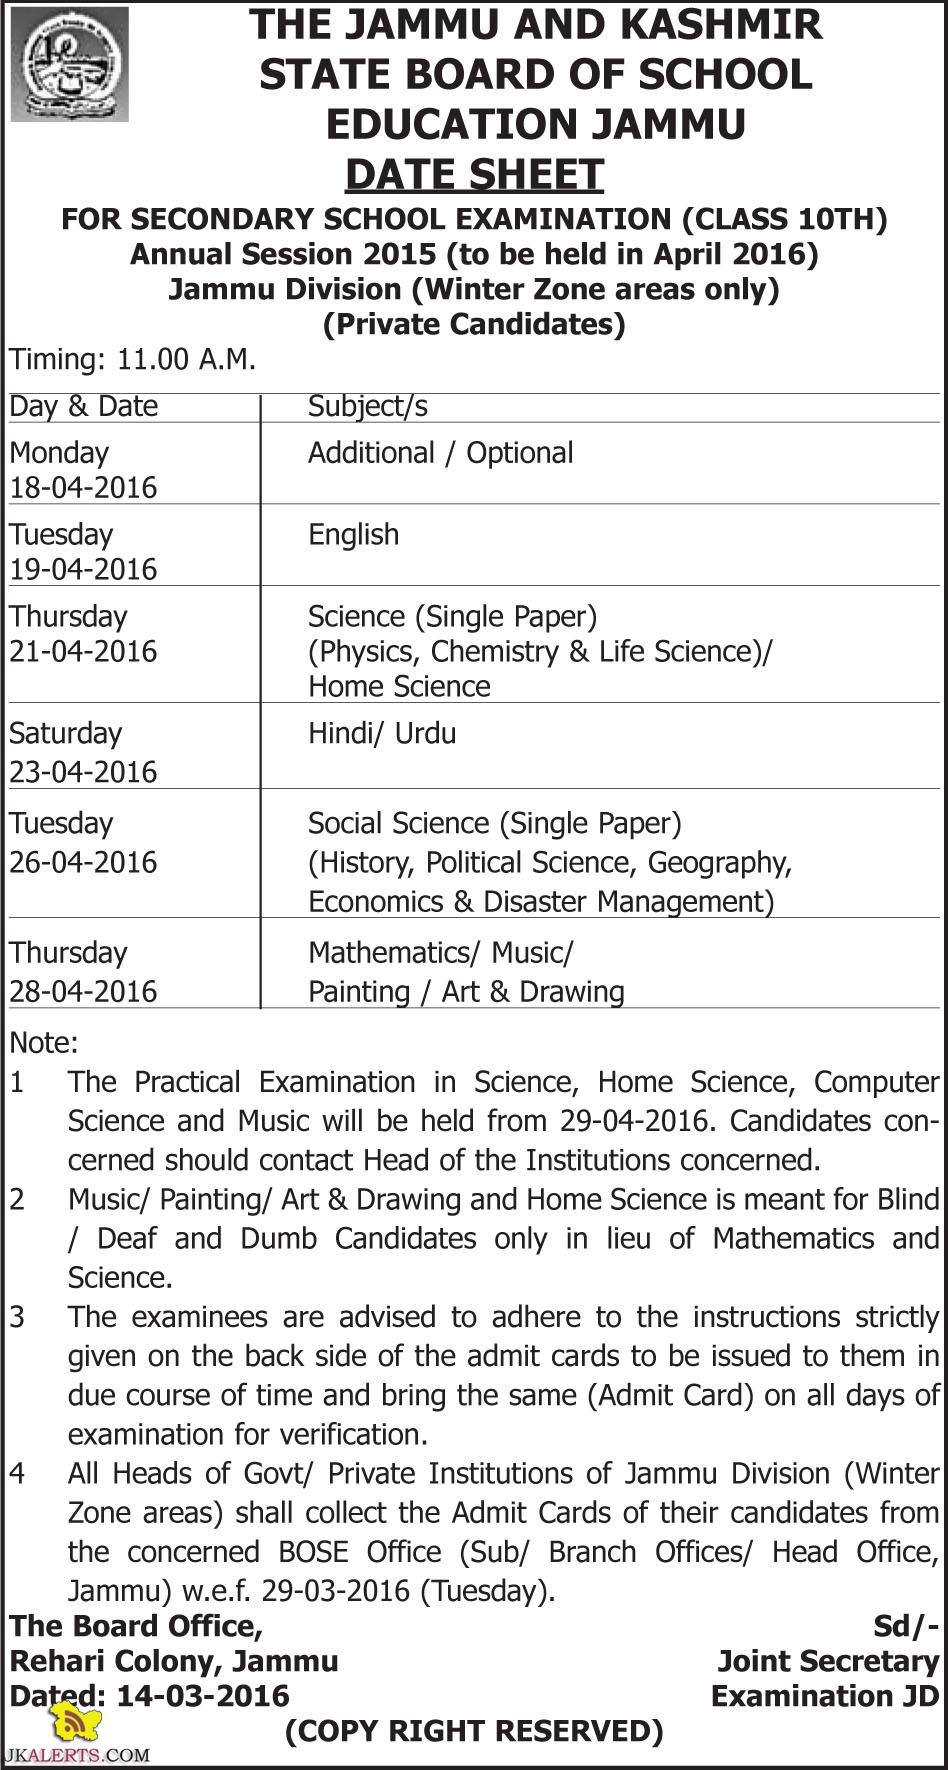 JKBOSE DATE SHEET FOR CLASS 10TH ANNUAL 2015 Jammu Division Winter Zone